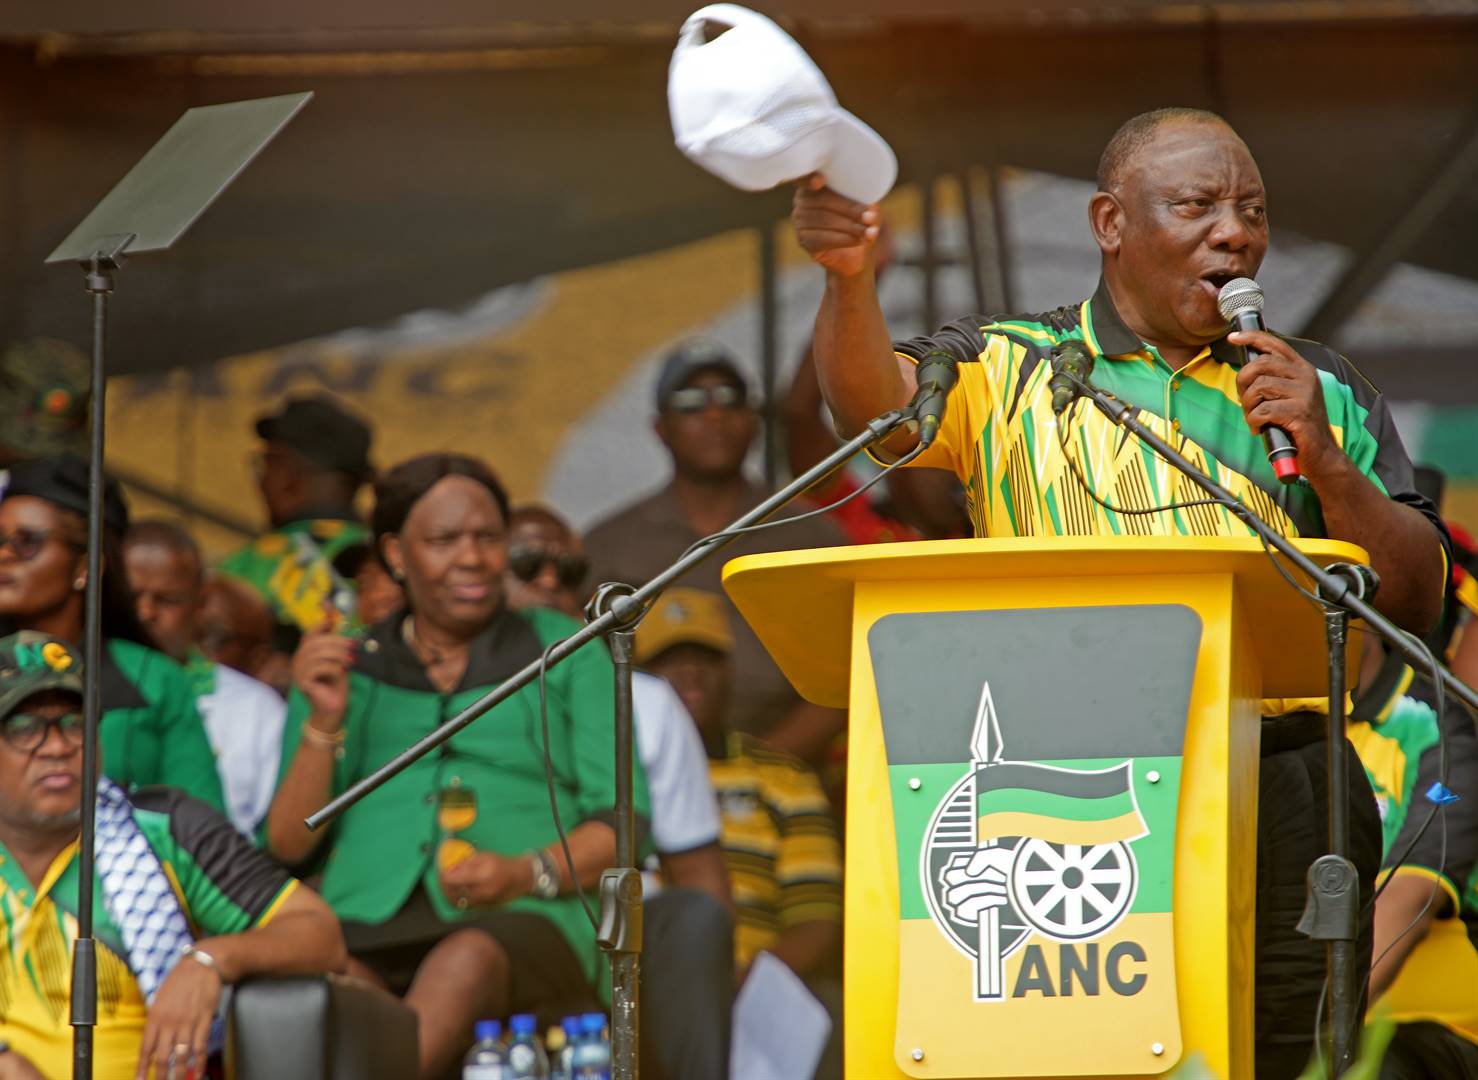 Ipsos estimated support for the ANC at 40.2%, down from 40.5% in a similar poll released in February and 43% in October. President Cyril Ramaphosa is seeking a second term.